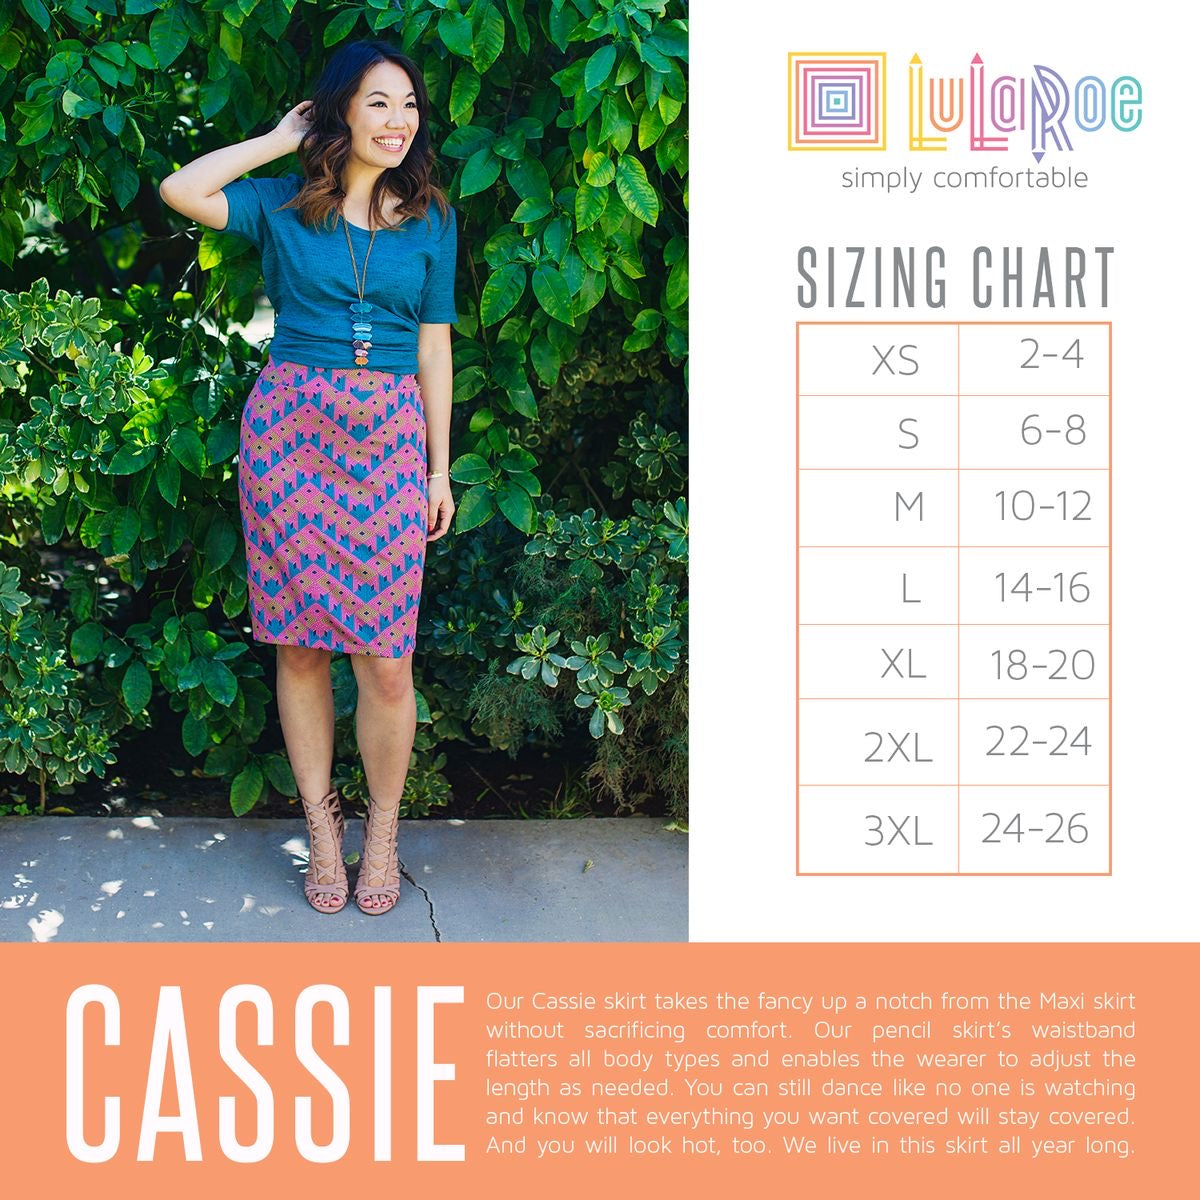 LuLaRoe Womens L Pink/Blue ‘Toy Story’ Silhouette Print Cassie Skirt NWT*